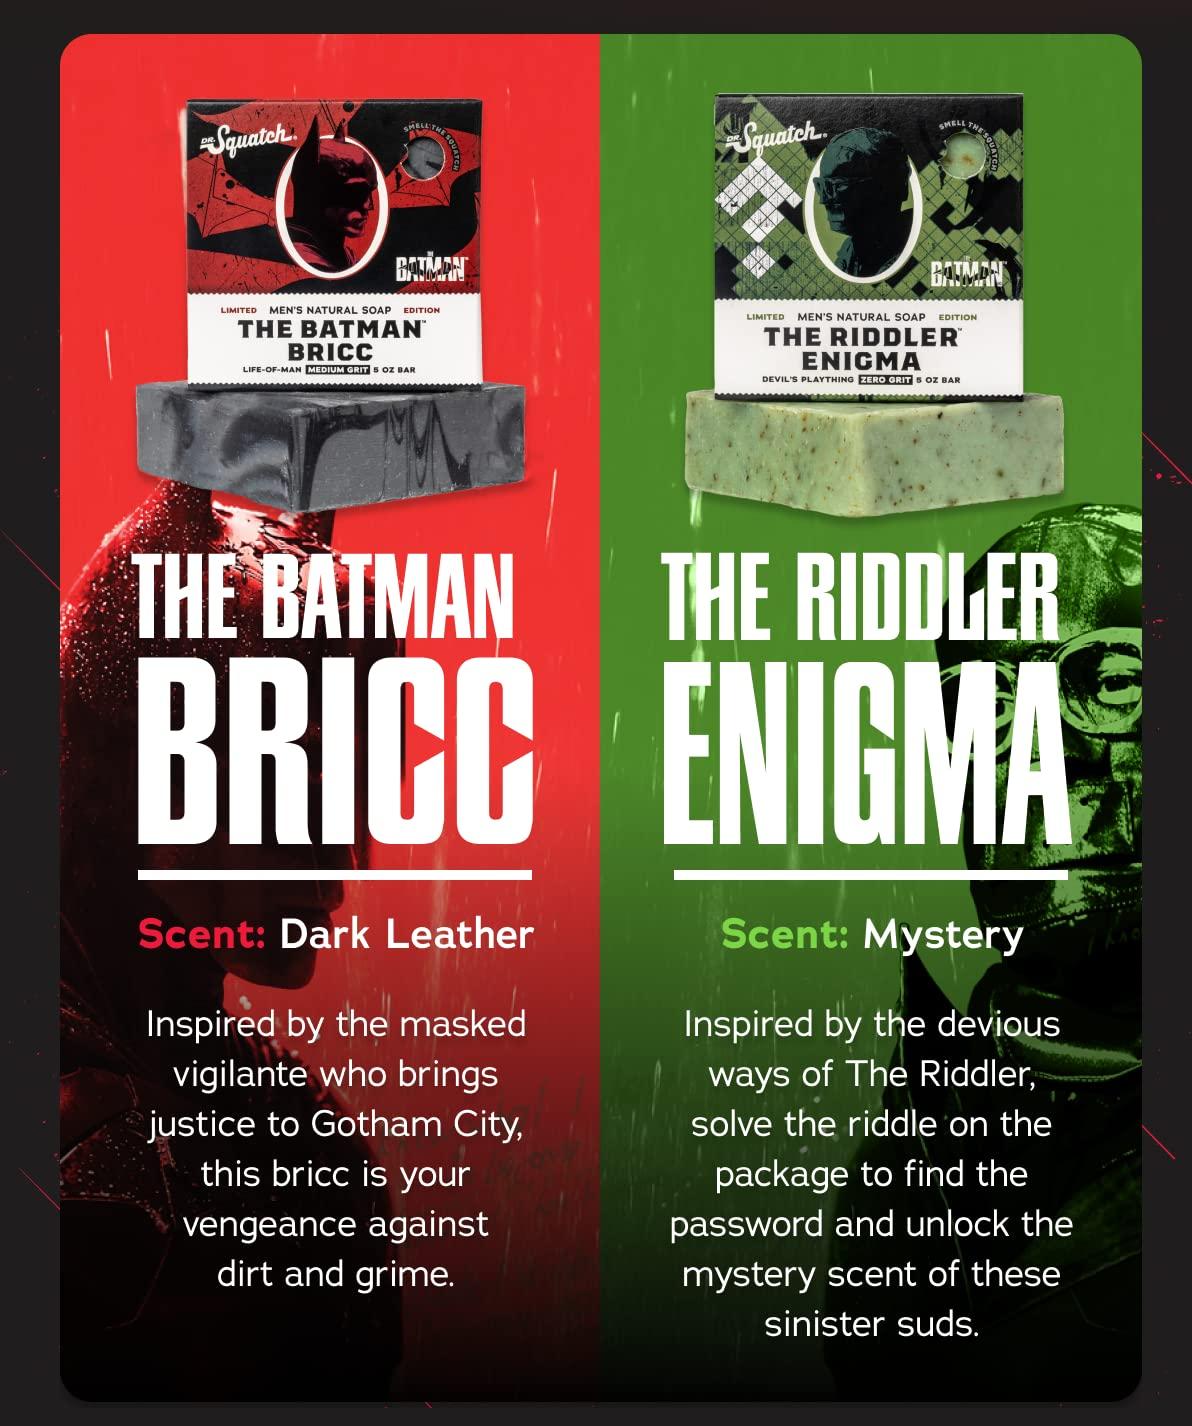 Dr. Squatch Limited Edition Soap. The Batman. The Riddler Enigma